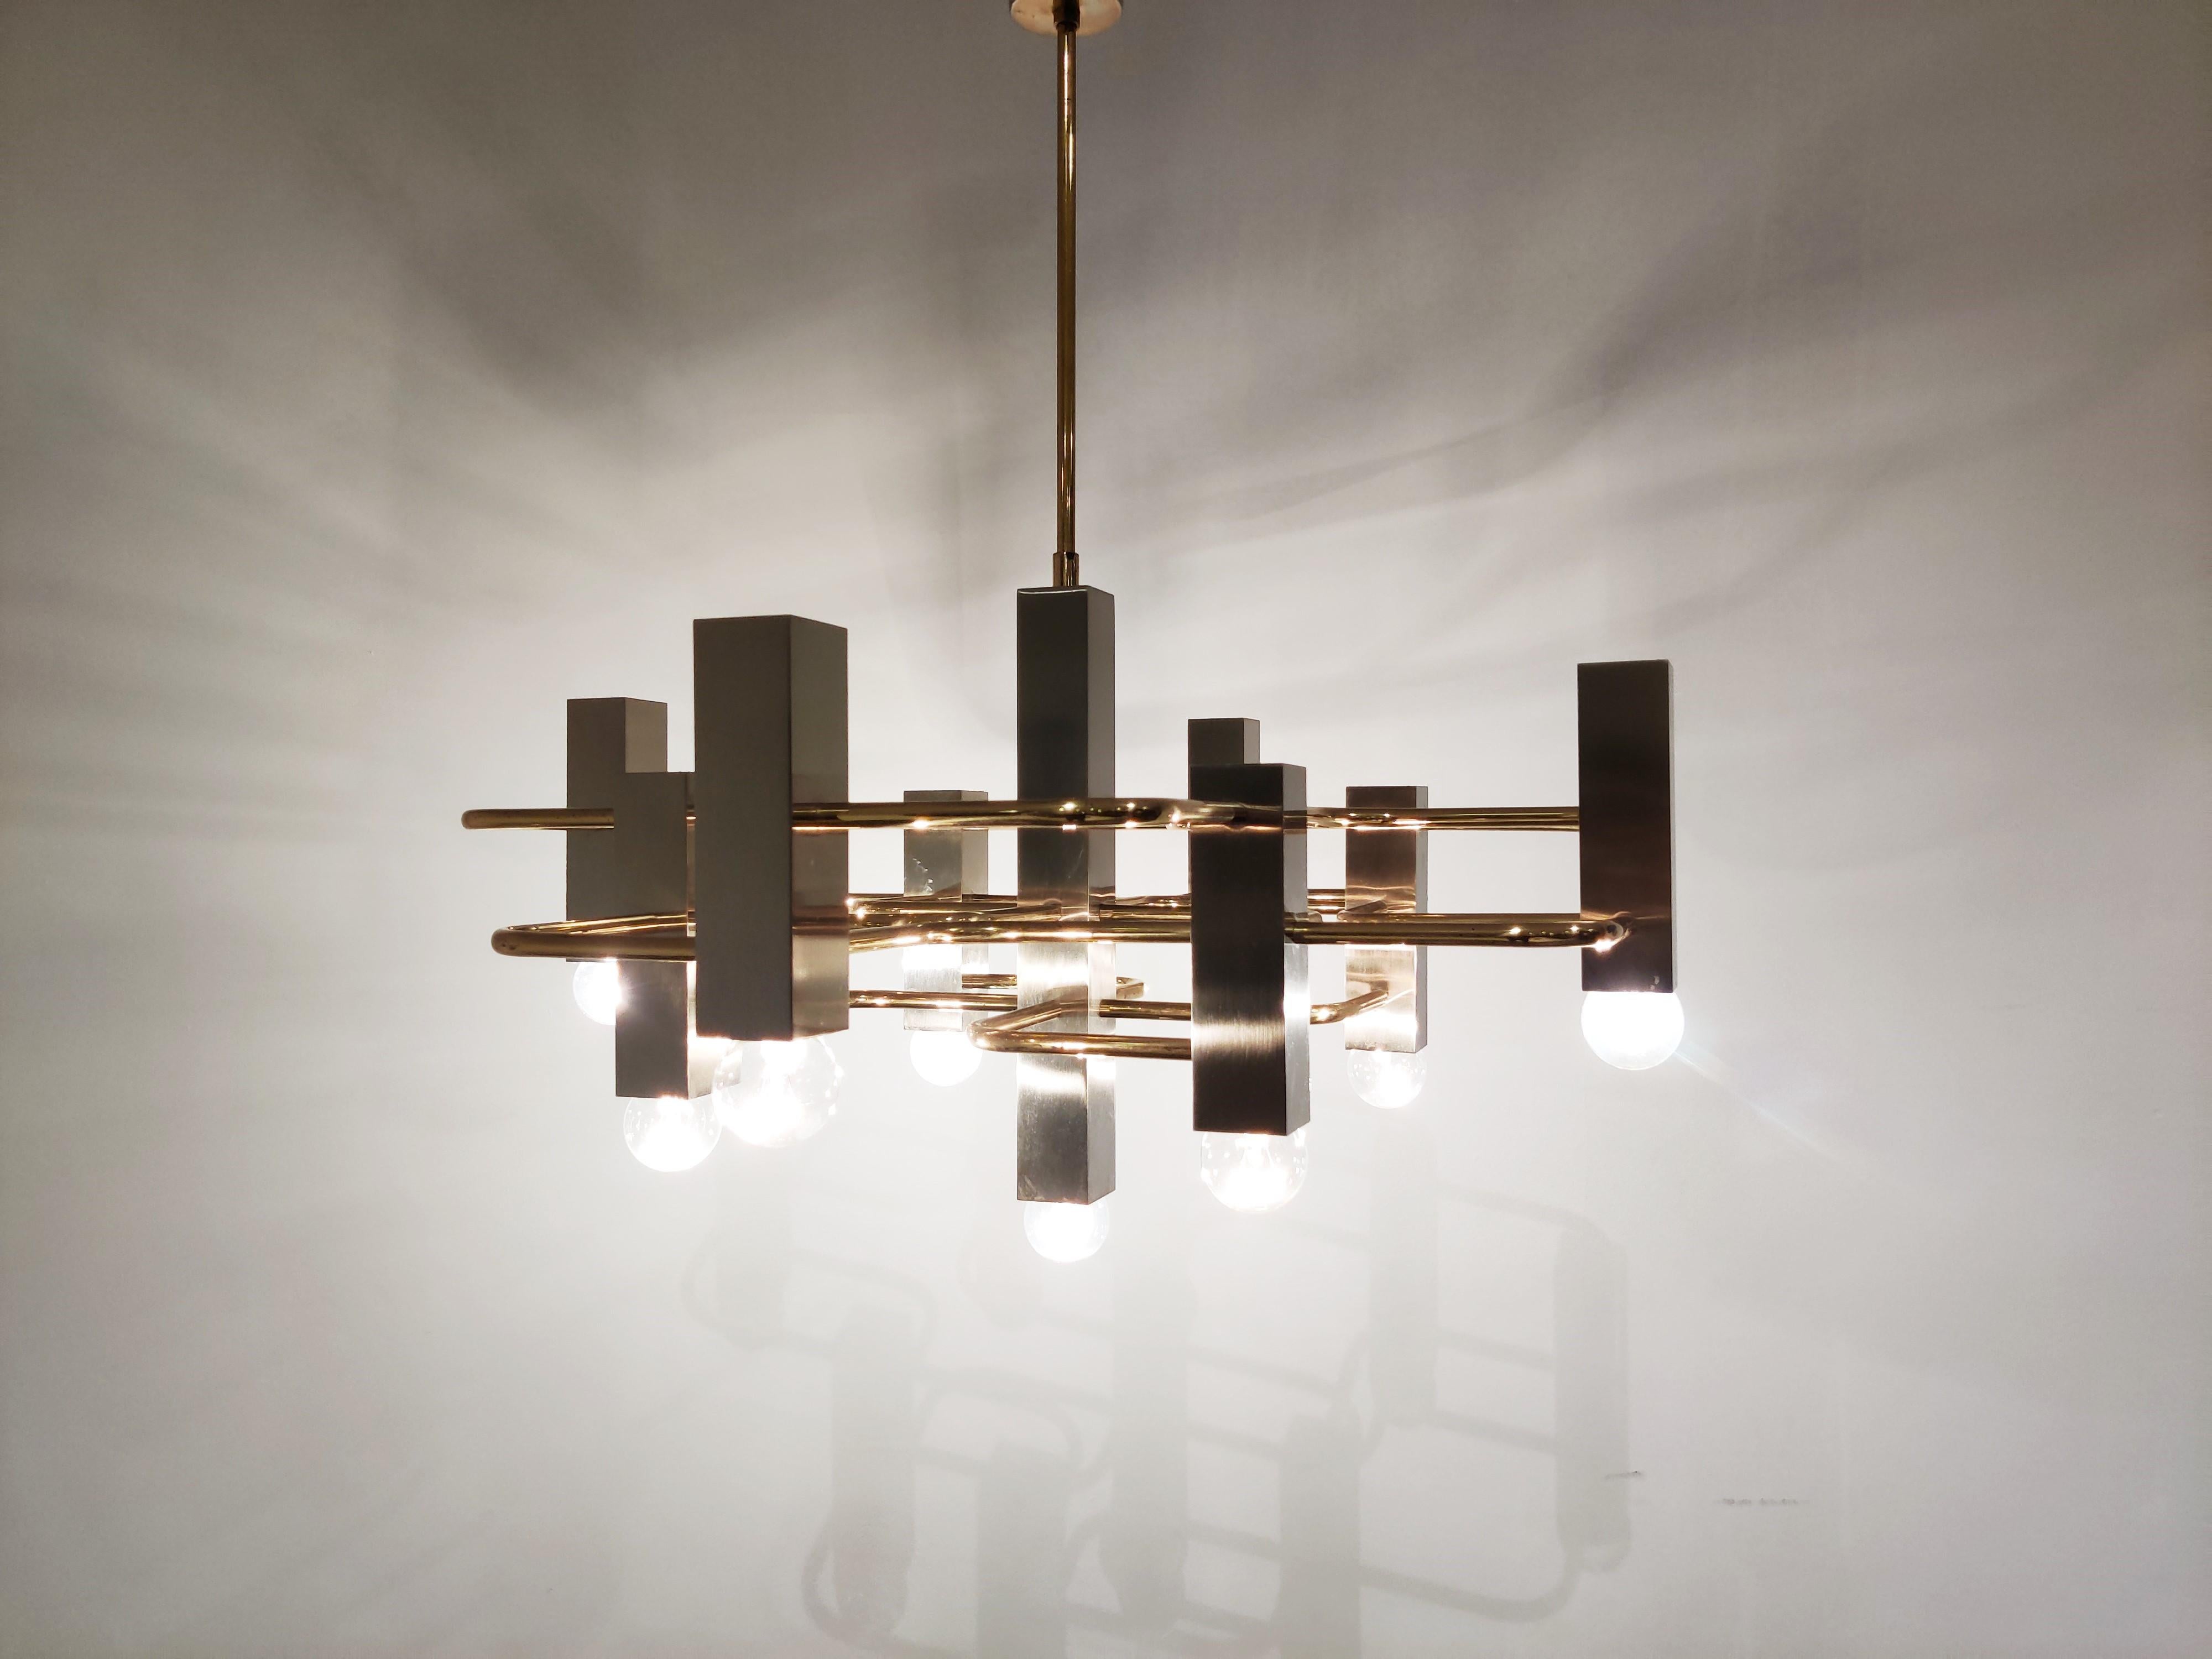 Vintage cubic Sciolari chandelier with 9-light points in brass and brushed steel.

The chandelier is in very good condition and in full working order.

Tested and ready for use, chandelier will work all around the world.

Timeless design and